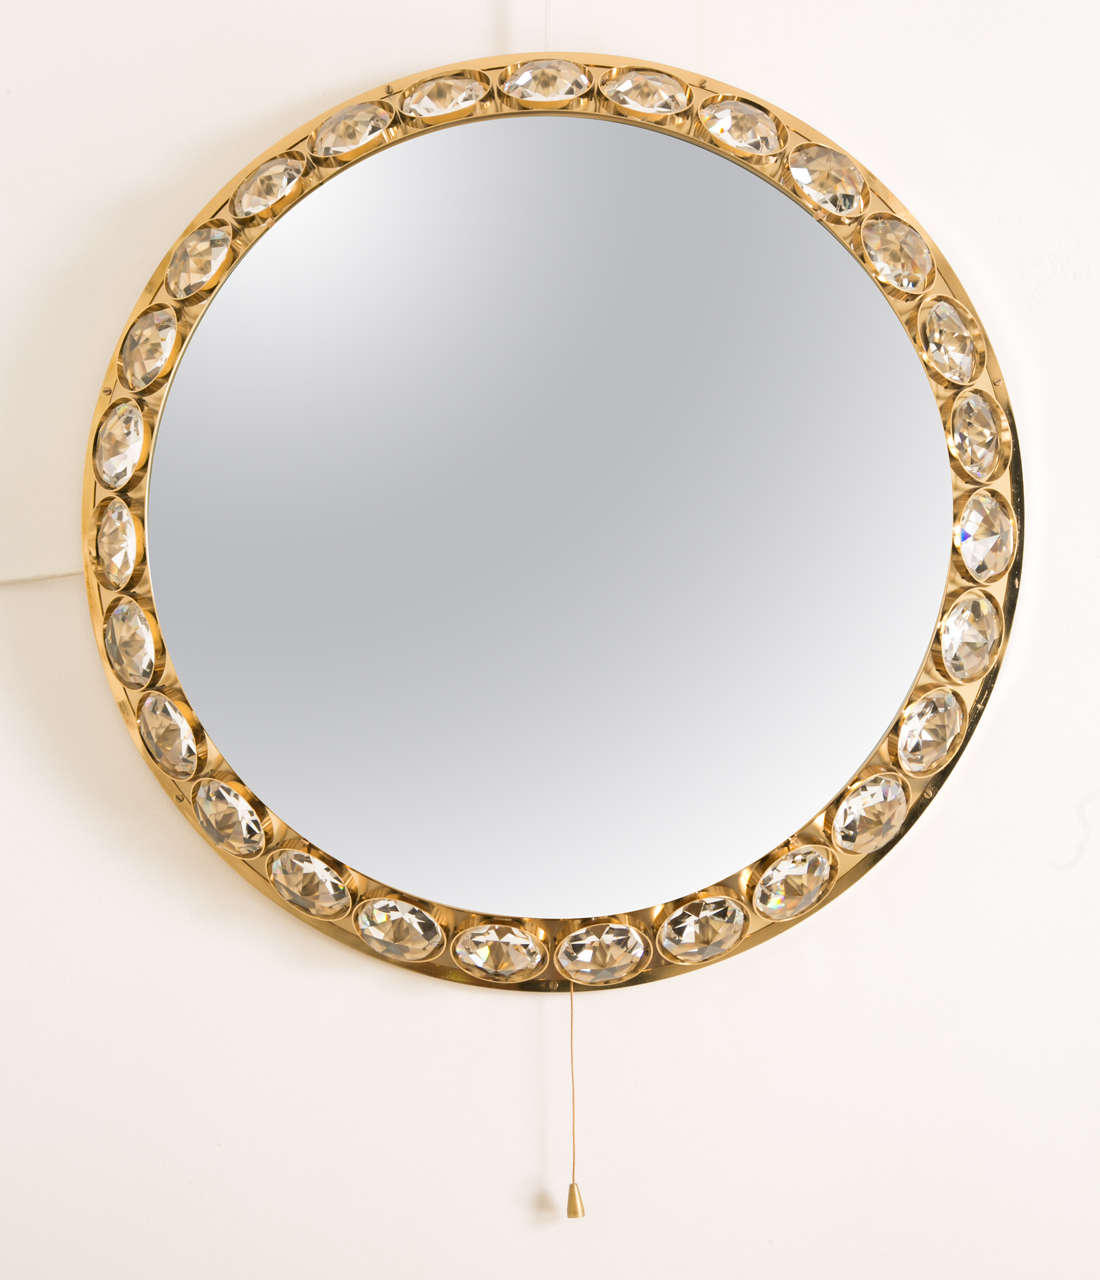 Spectacular circular lighting glass diamonds mirror by Bakalowits und Sohne, Austria, 1960s.
Ornated with 27 cut-glass diamonds; Refined double gilt brass structure.
Inside diameter 50 cm. Light bulbs into.
This is a typical mirror from this period